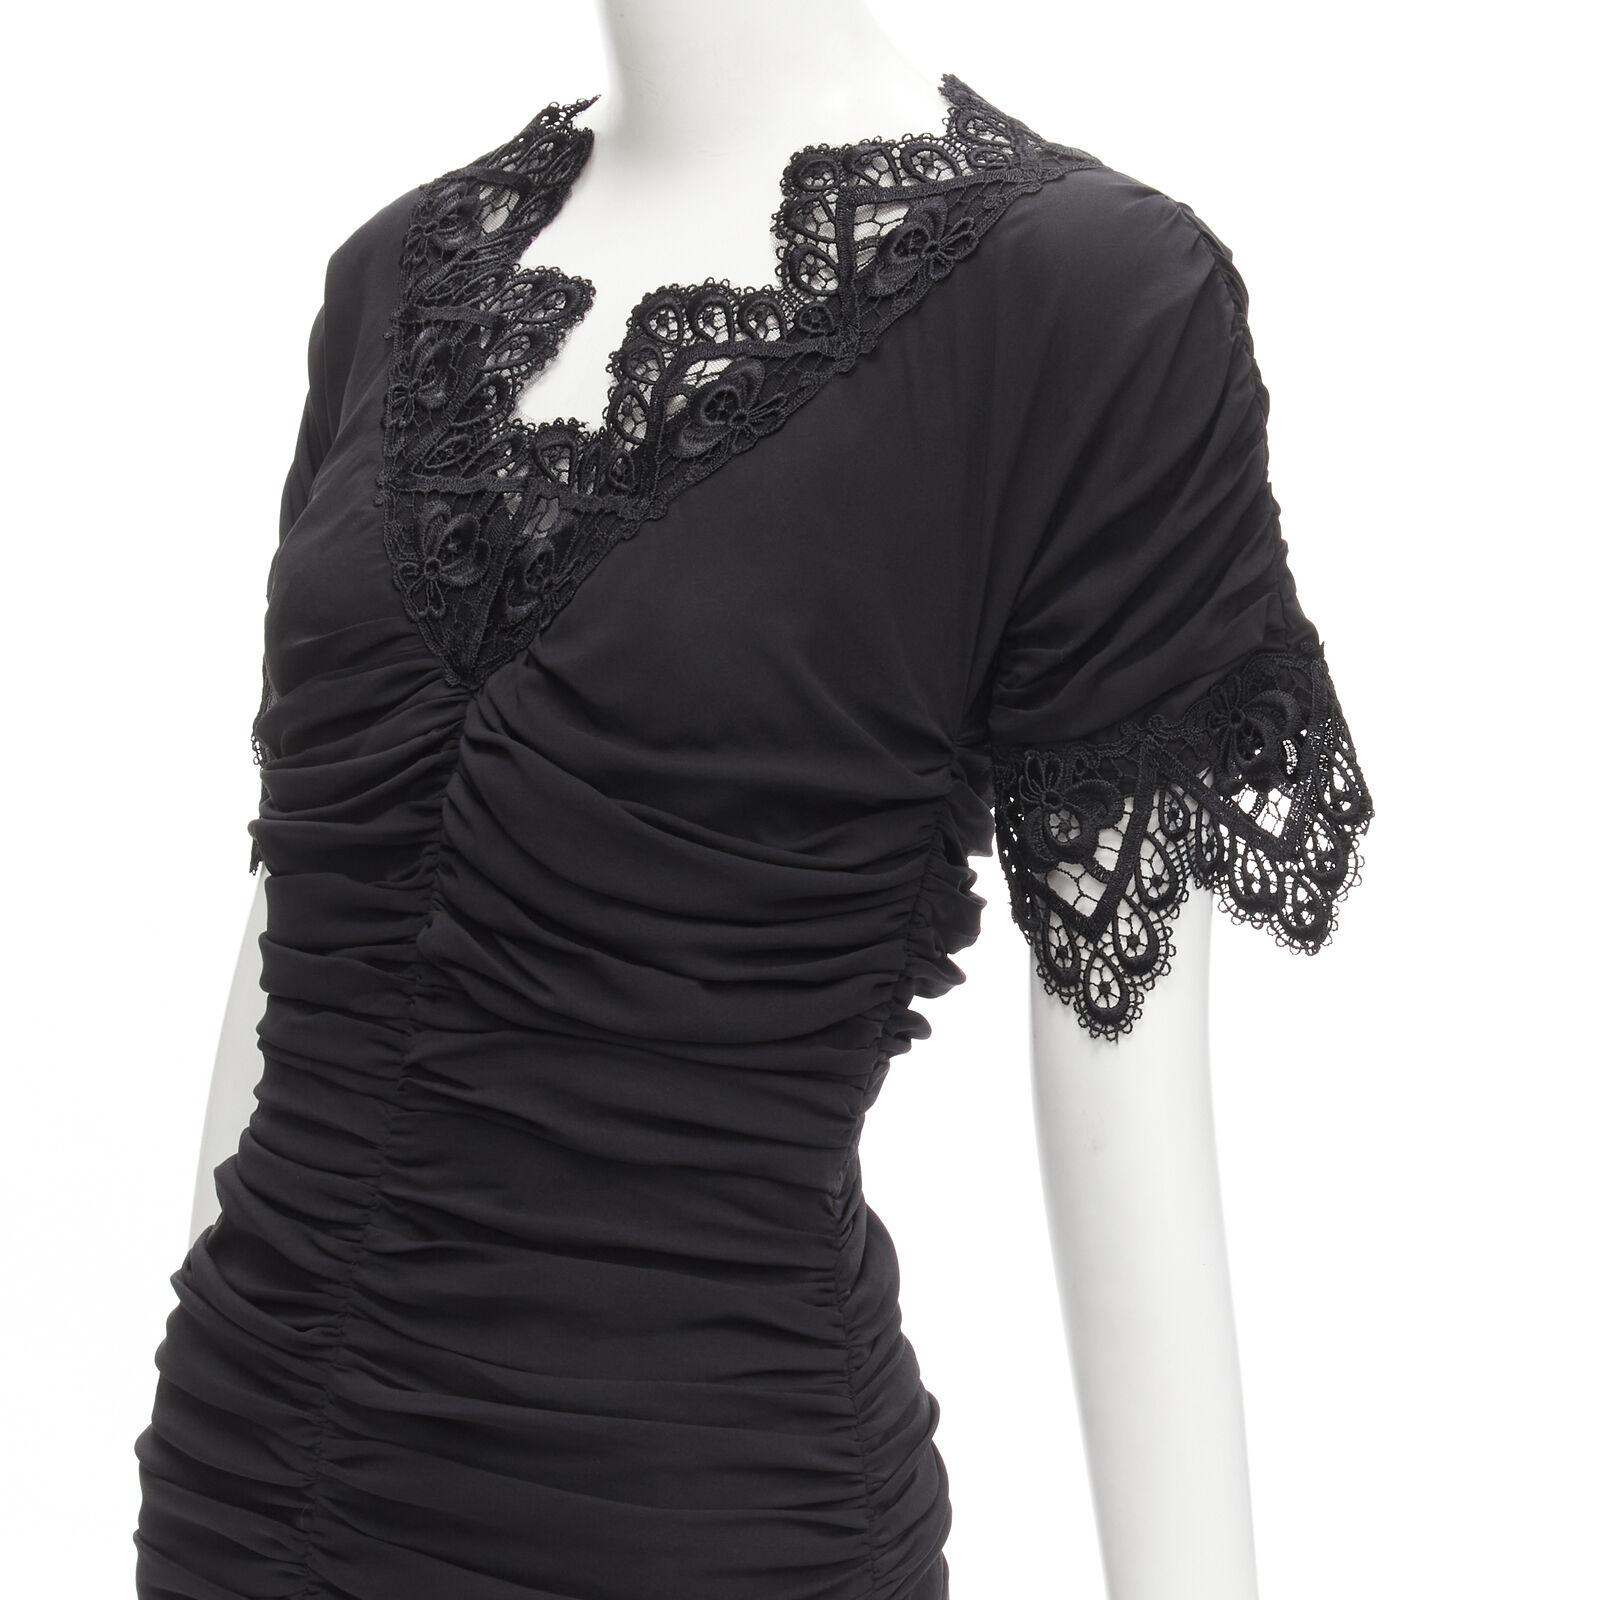 new DOLCE GABBANA black silk gathered shirred lace trim cocktail dress IT42 M
Reference: TGAS/C01543
Brand: Dolce Gabbana
Designer: Domenico Dolce and Stefano Gabbana
Material: Silk, Blend
Color: Black
Pattern: Abstract
Closure: Zip
Lining: